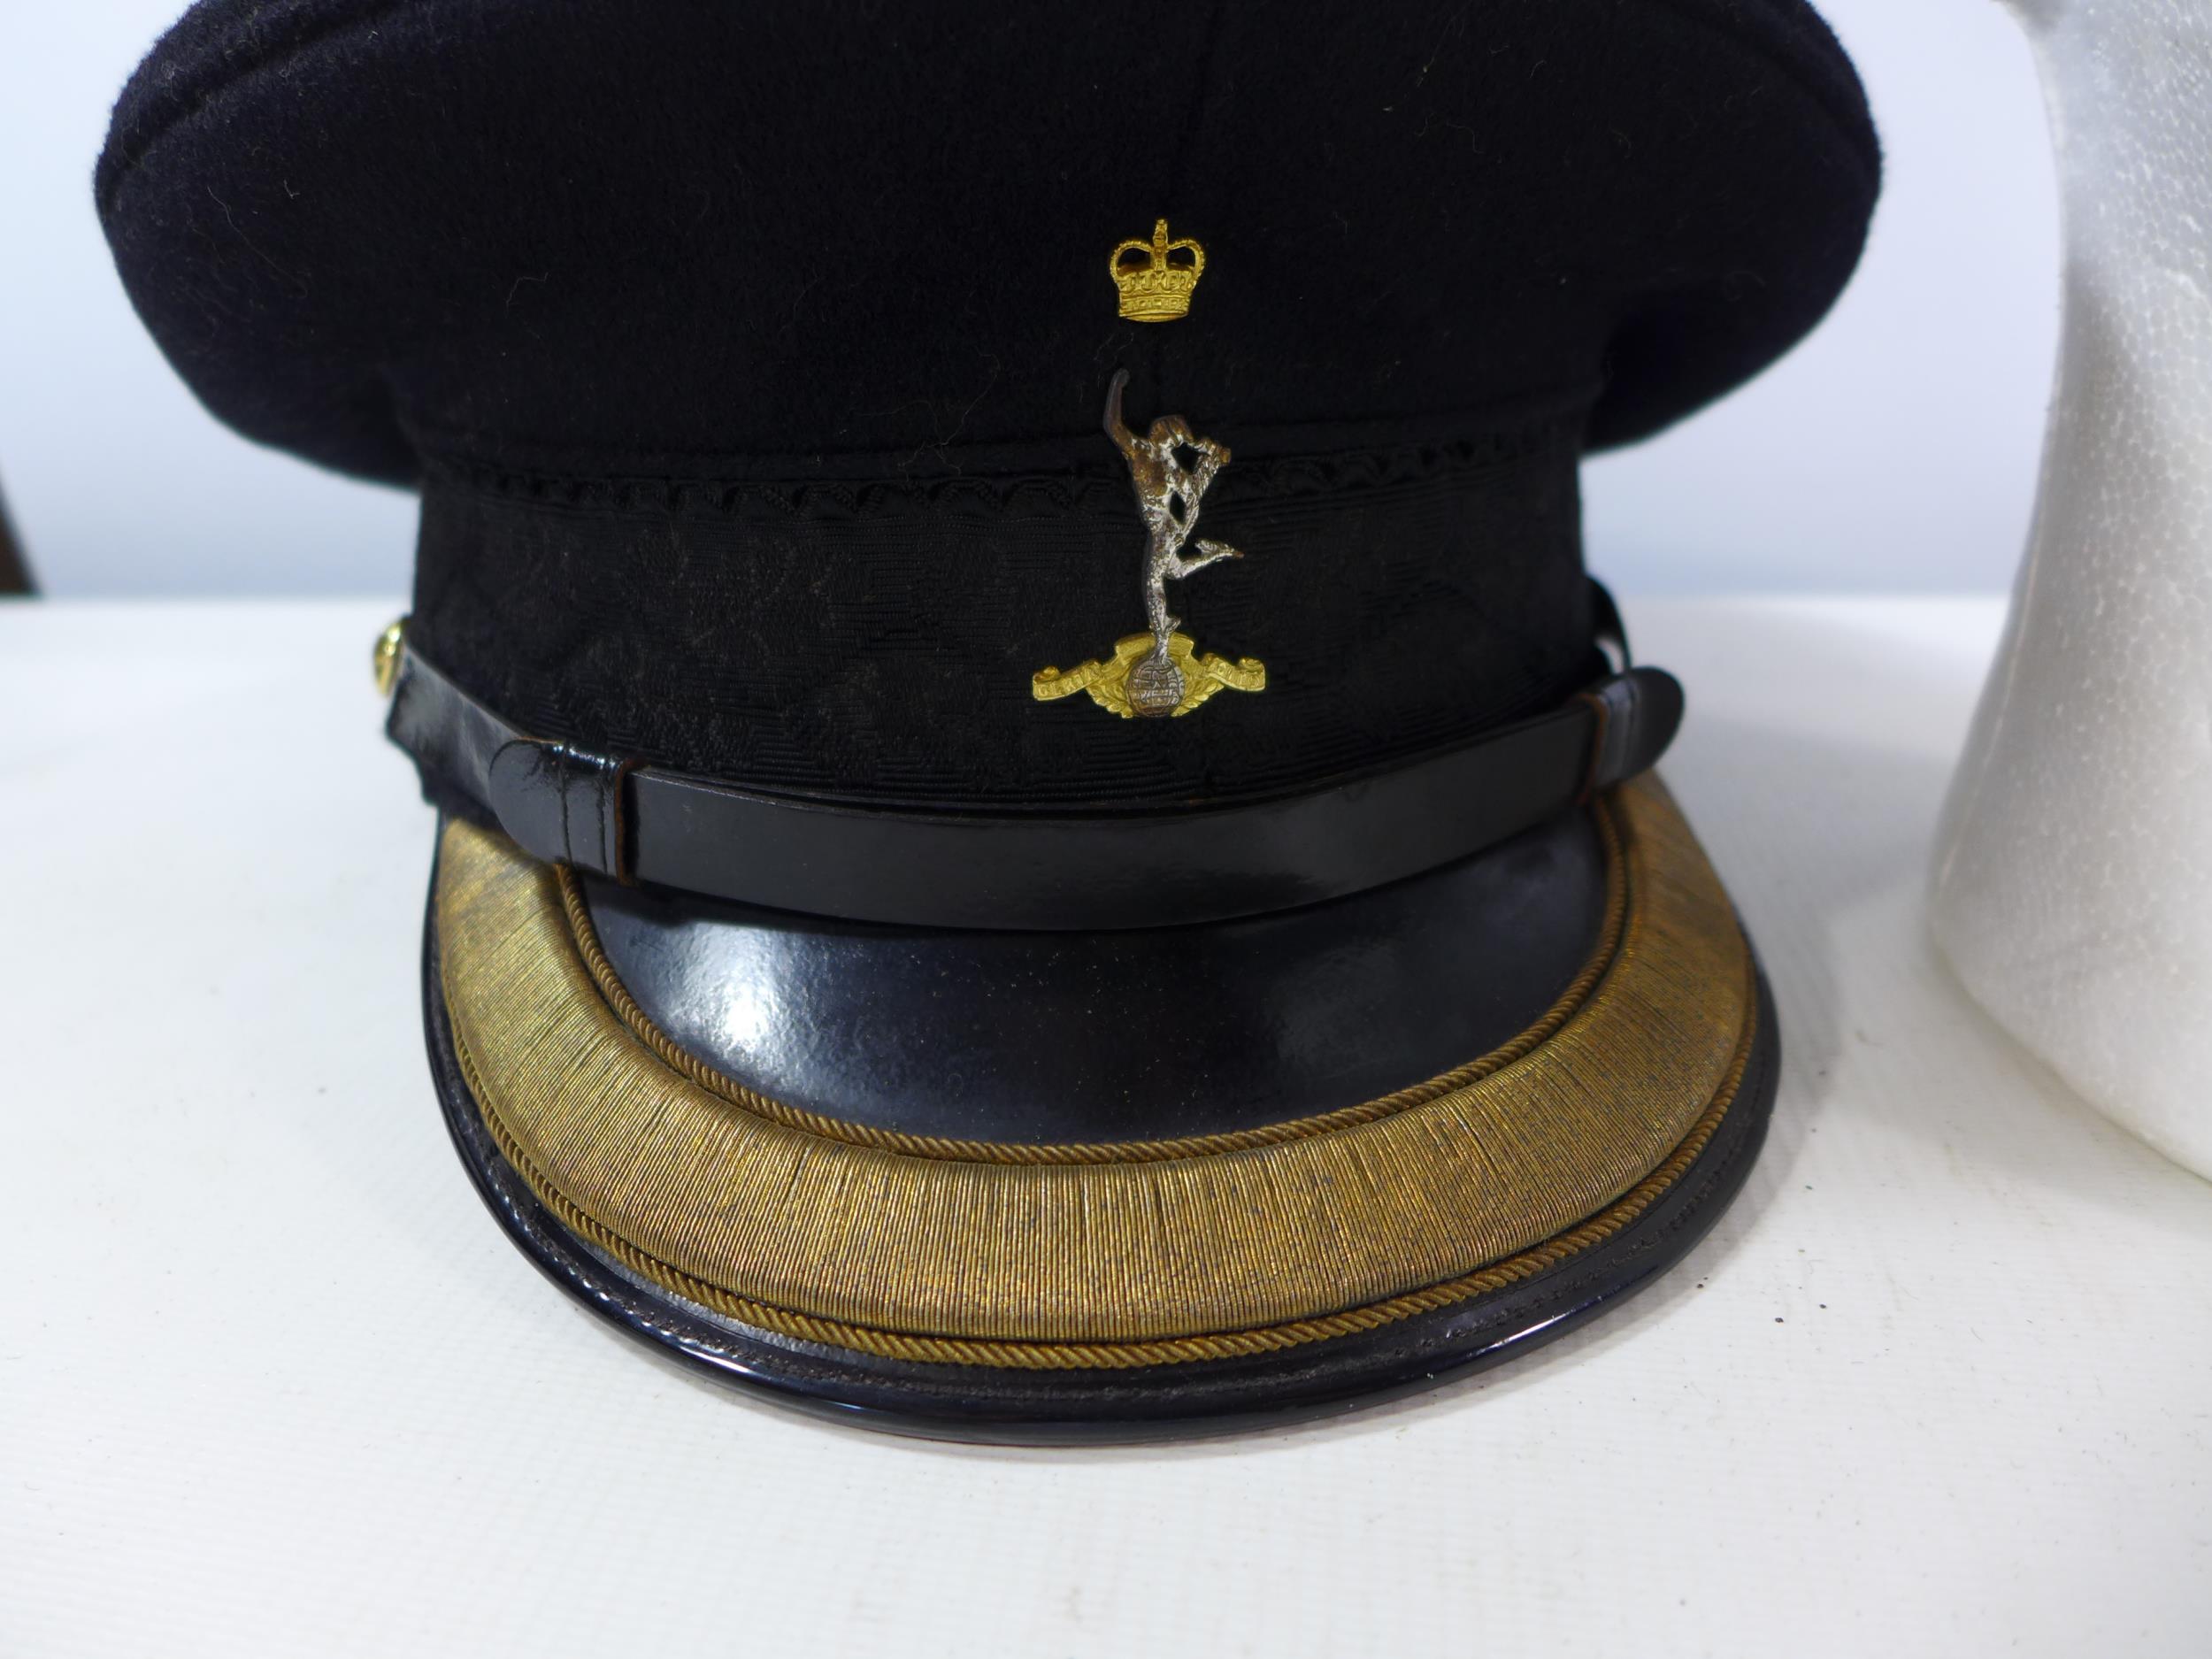 A BRITISH ROYAL MILITARY POLICE PEAKED CAP AND A ROYAL CORP OF SIGNALS PEAKED CAP, SIZE 7 1/4 - Image 3 of 4